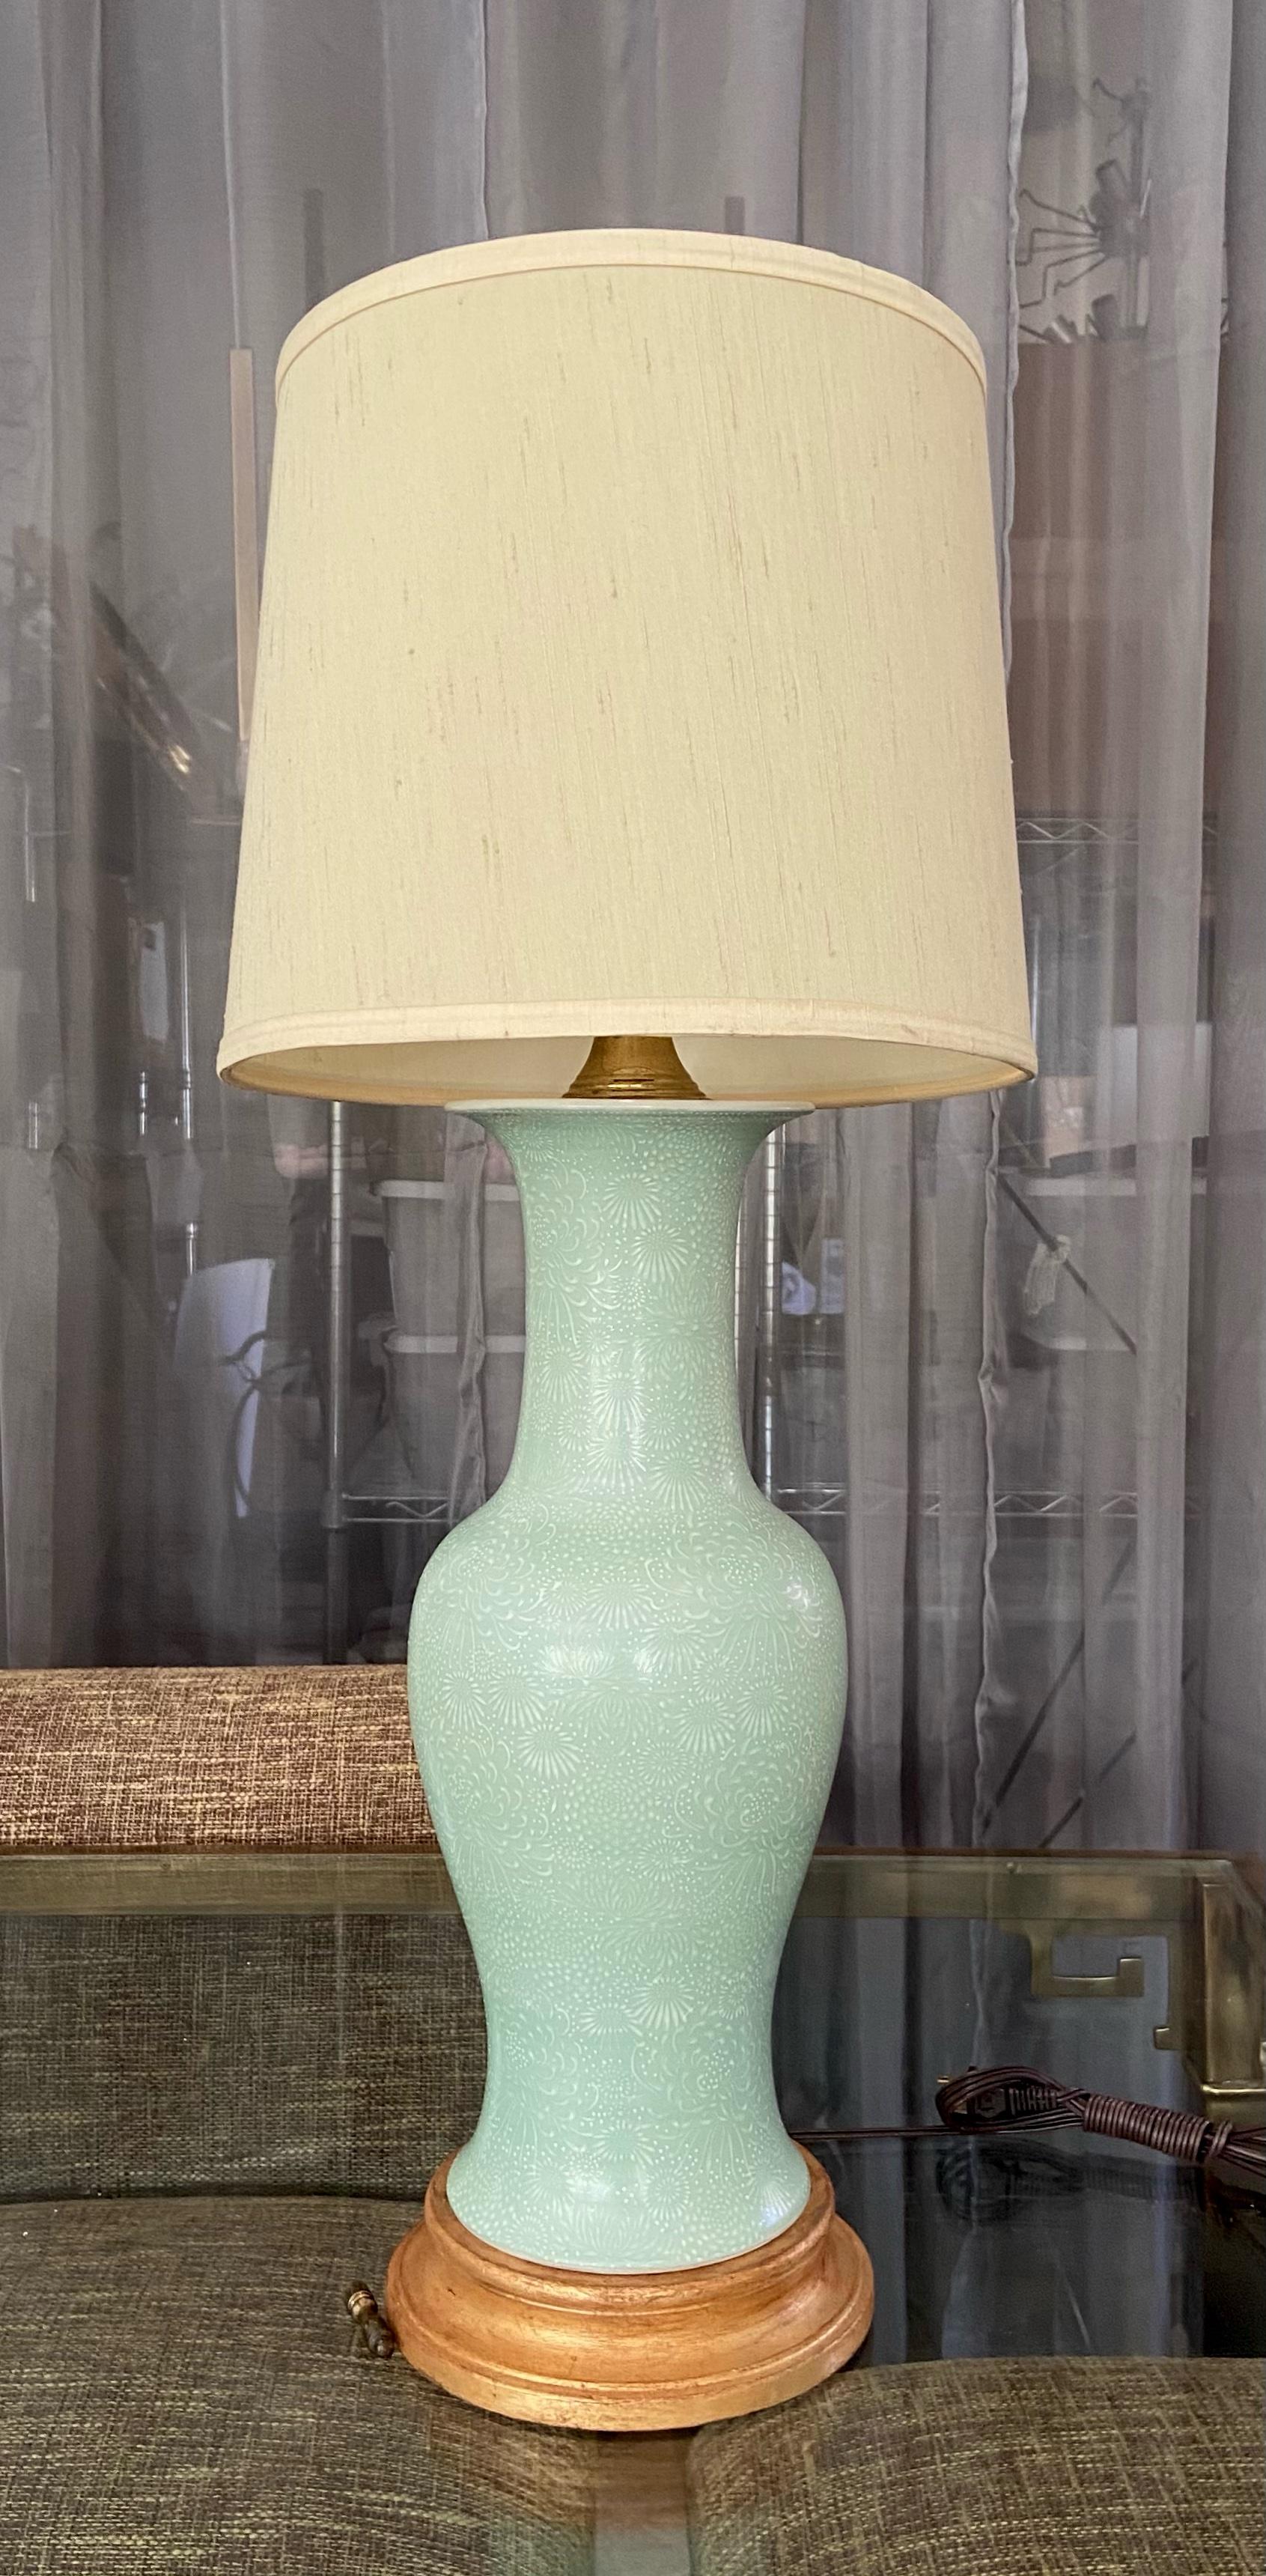 Single Japanese celadon green incised porcelain baluster form vase table lamp. Mounted on gilt turned wood lamp base. Newly wired with new 3 way socket and fittings. Porcelain vase portion is 18